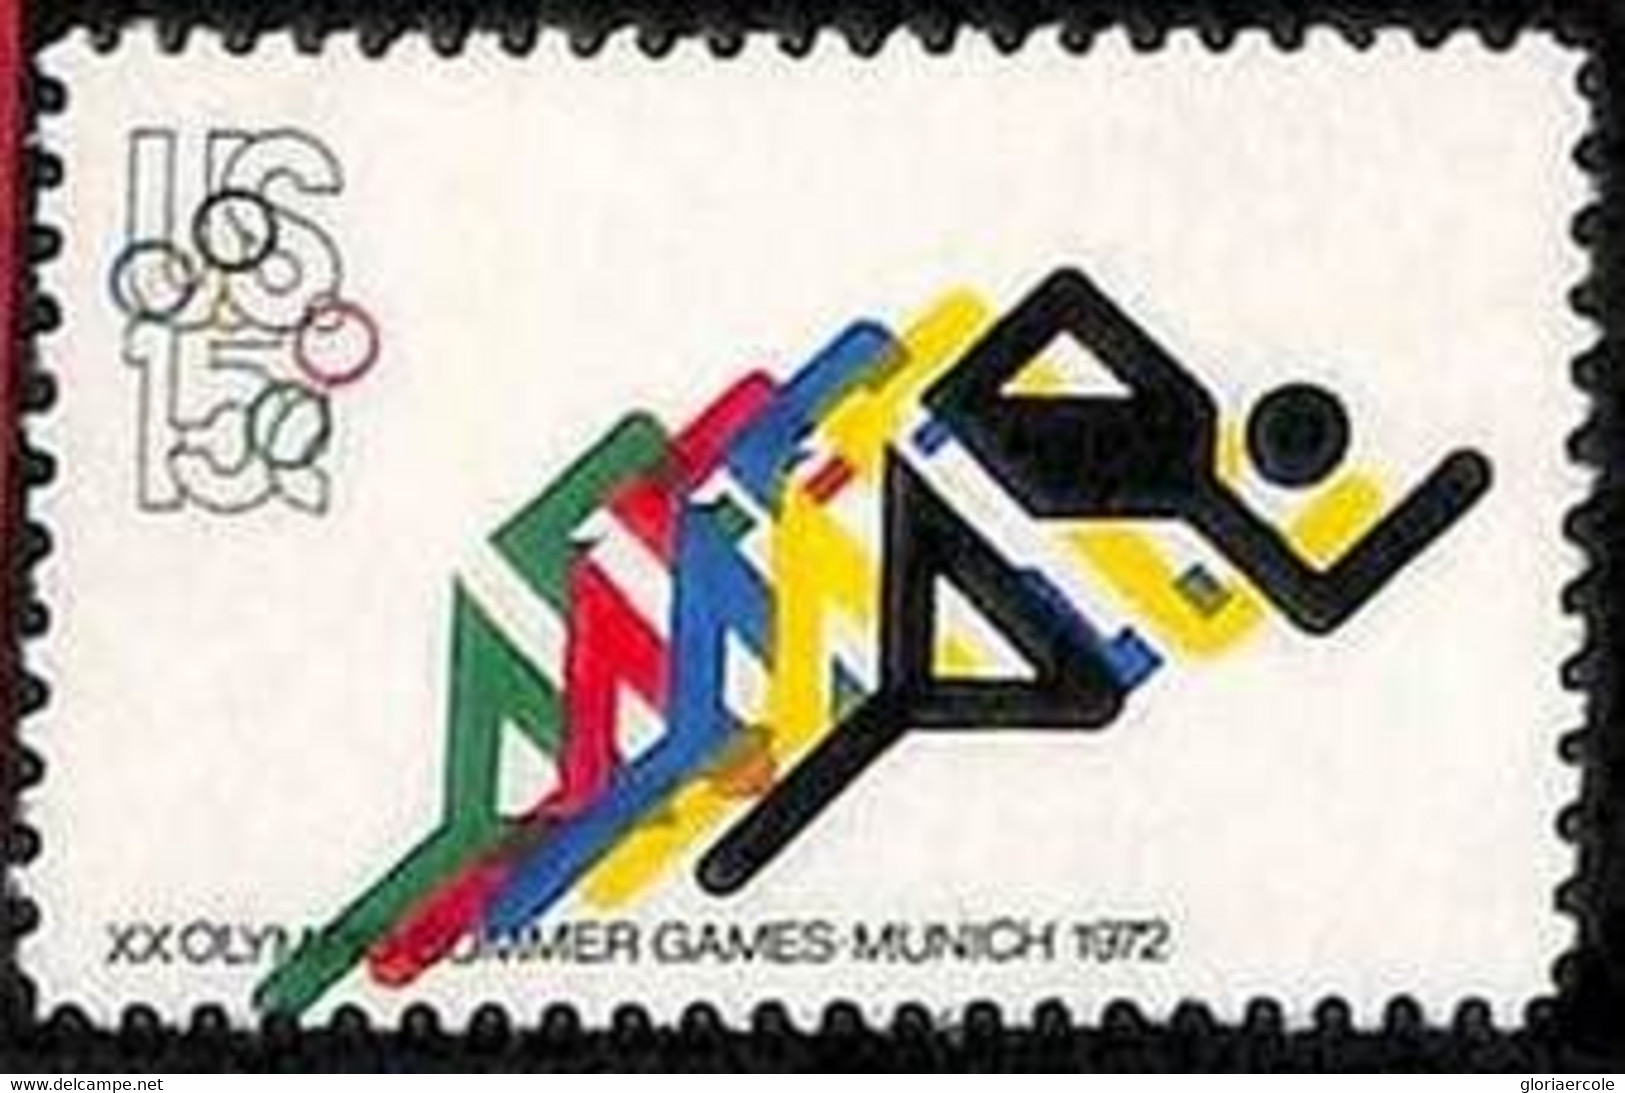 94809d - USA - STAMPS - Sc # 1462 Olympic Games -  SHIFTED PRINT - MNH - Variedades, Errores & Curiosidades